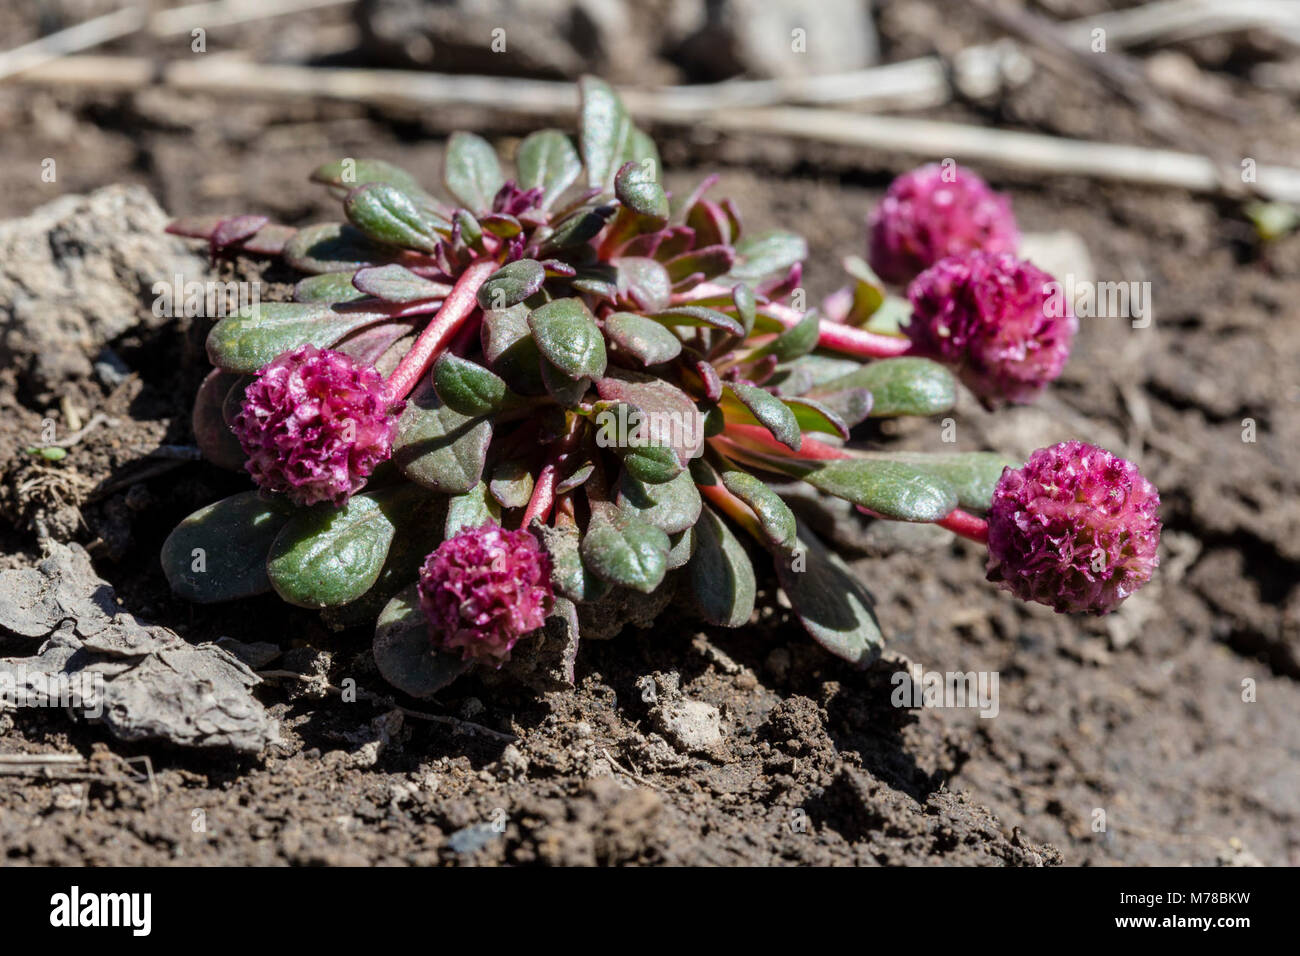 Mt Hood pussypaws - Cistanthe umbellata. Stock Photo